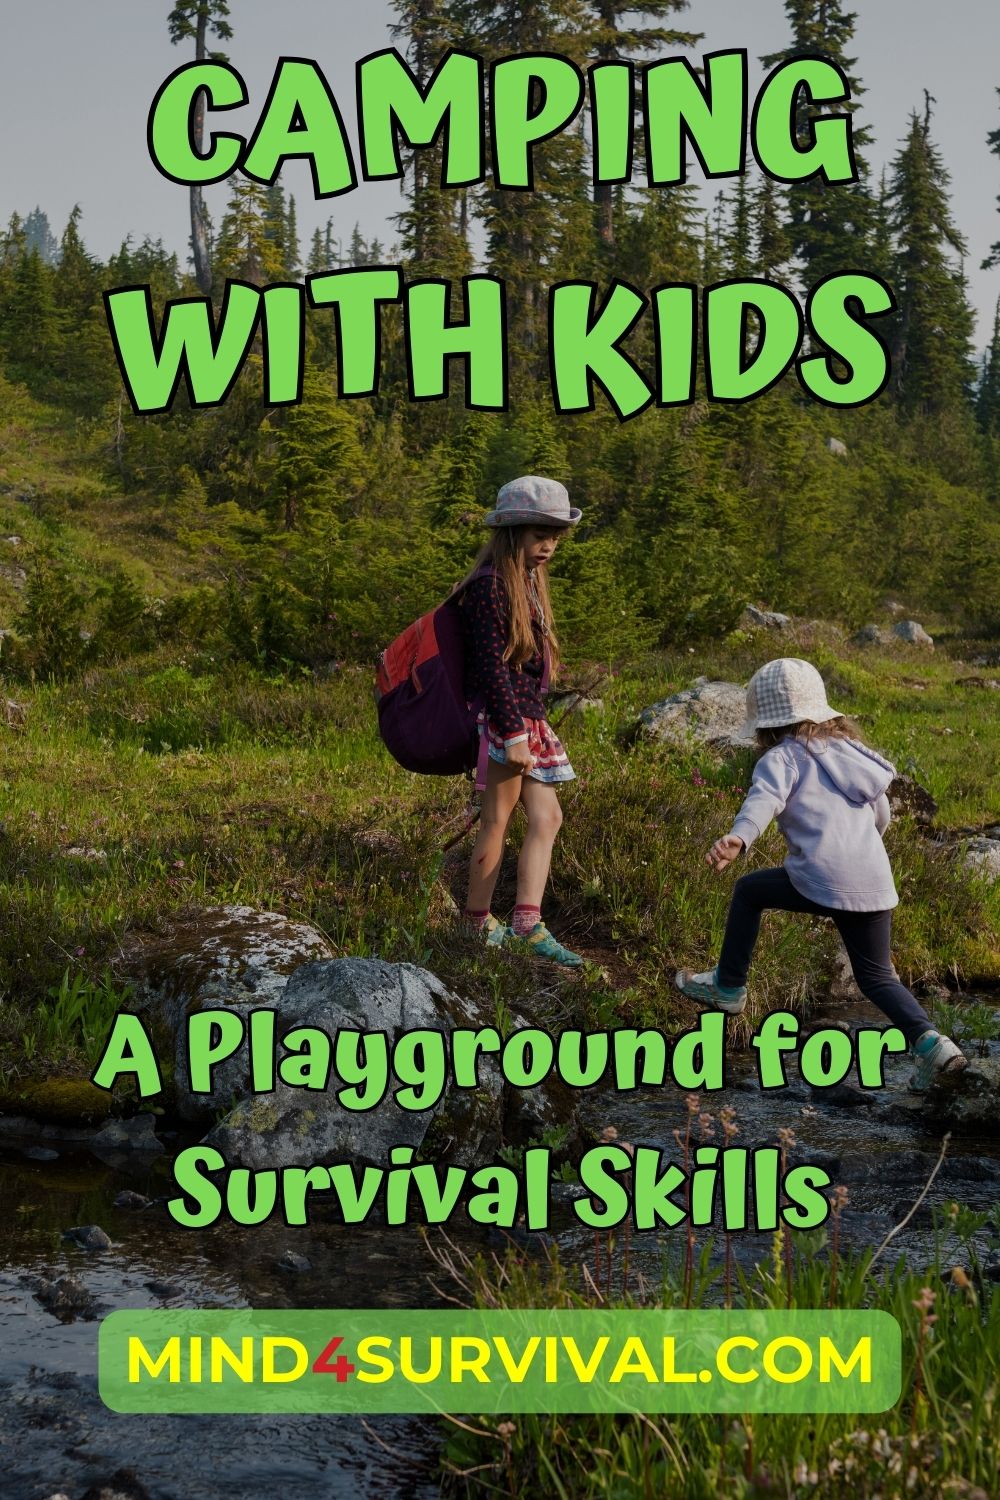 Camping with Kids: A Playground for Survival Skills